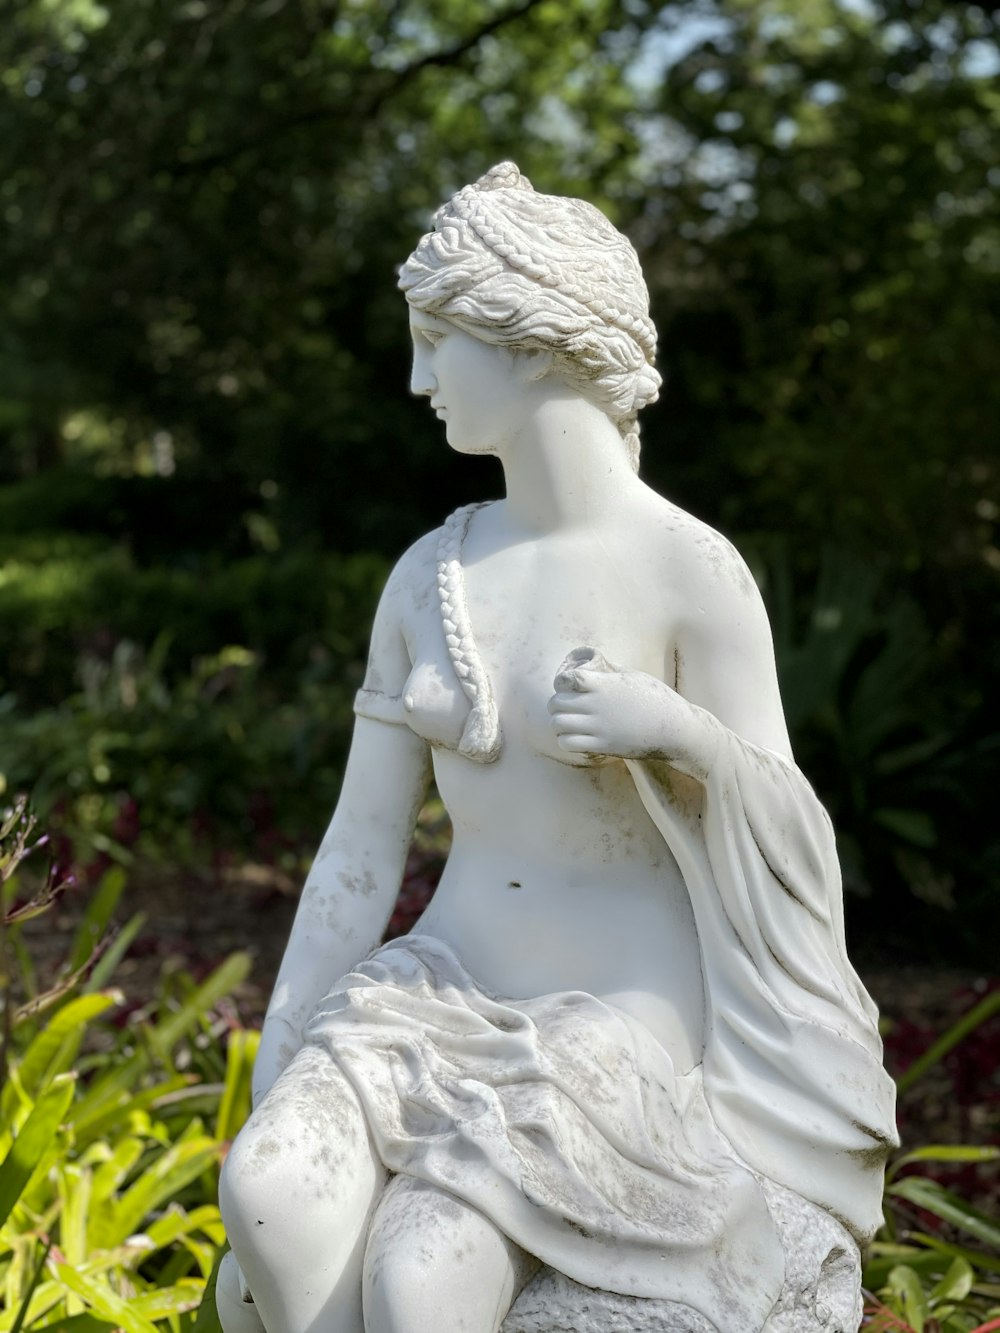 white angel statue near green plants during daytime